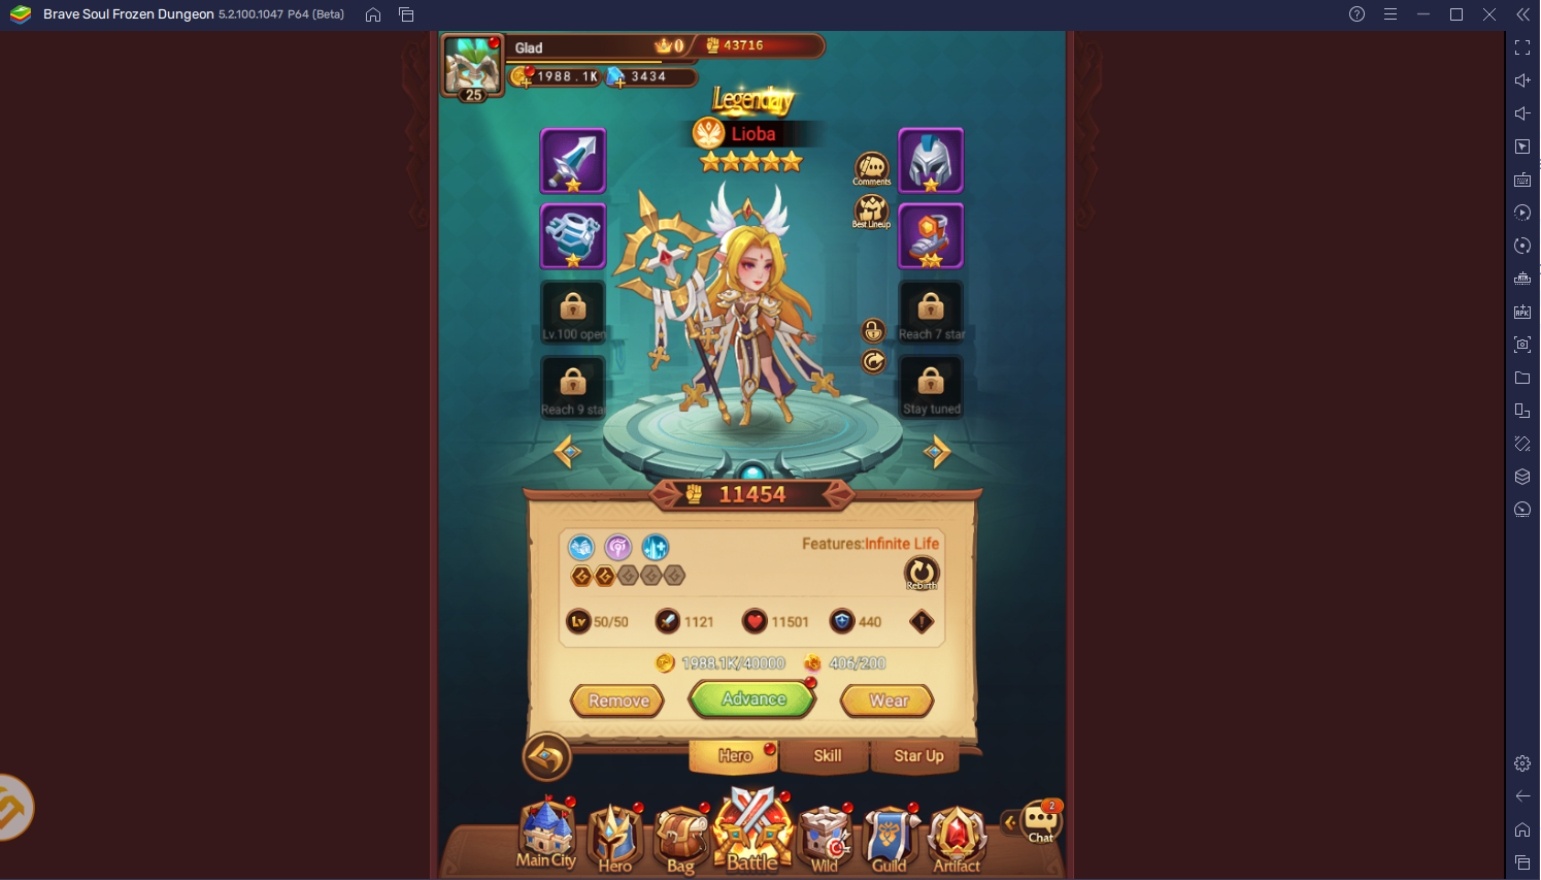 How to Increase CP in Brave Soul: Frozen Dungeon